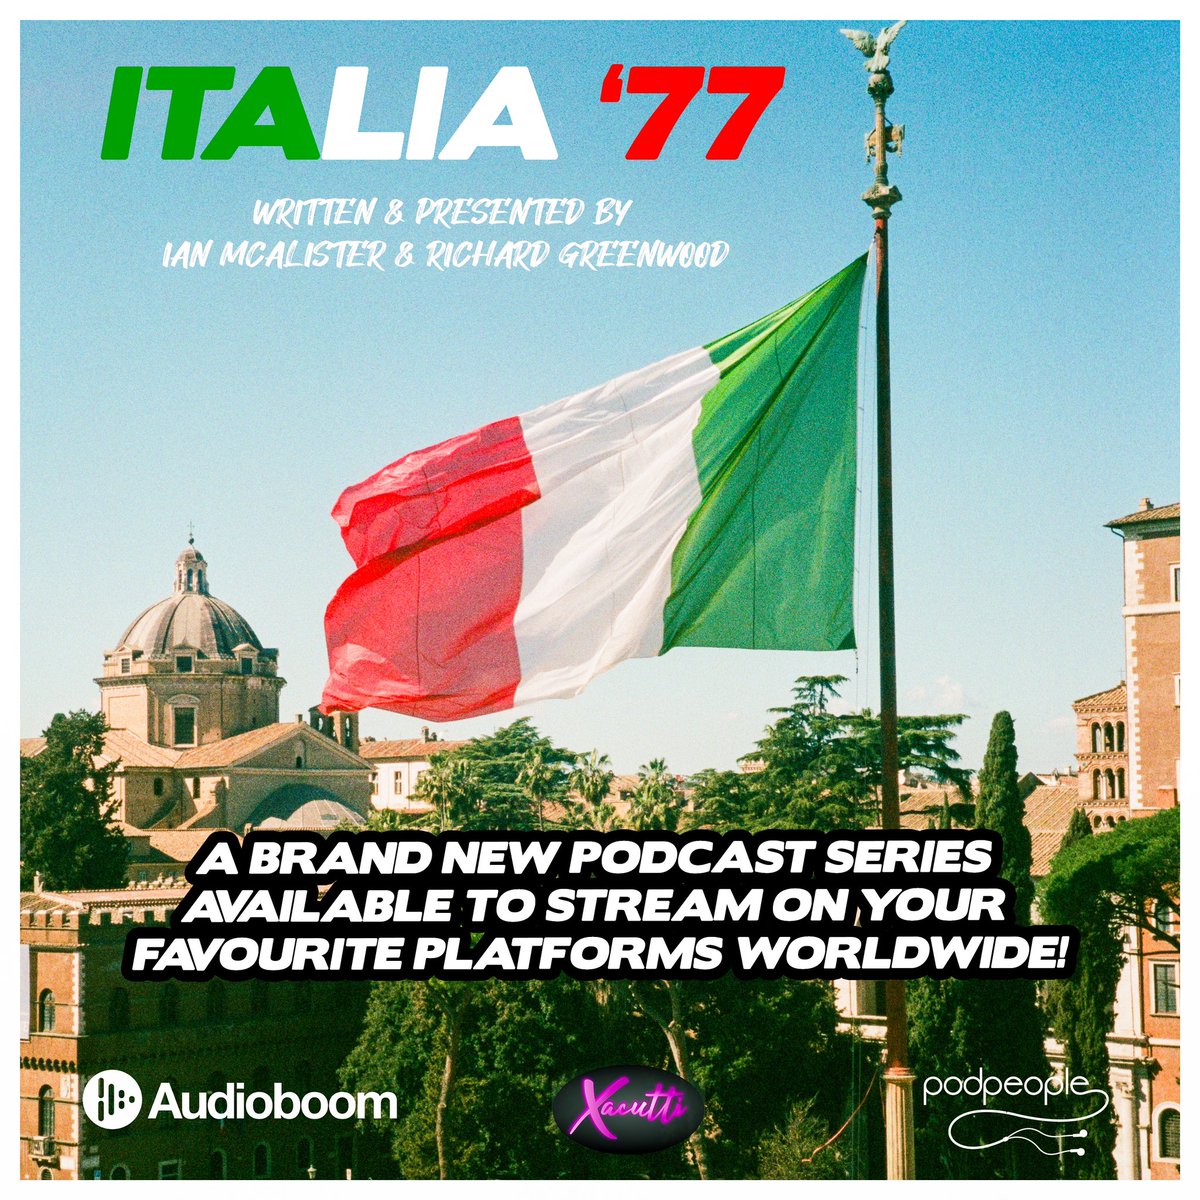 Do check out this exceptional new podcast series, this is my background and its a true story! Italia77 is a light hearted, true drama set in 1970's Italy. Search for 'Italia 77' on Apple, Spotify or wherever you get your favourite shows. Thank you.  #Italy #Travel #Rugby